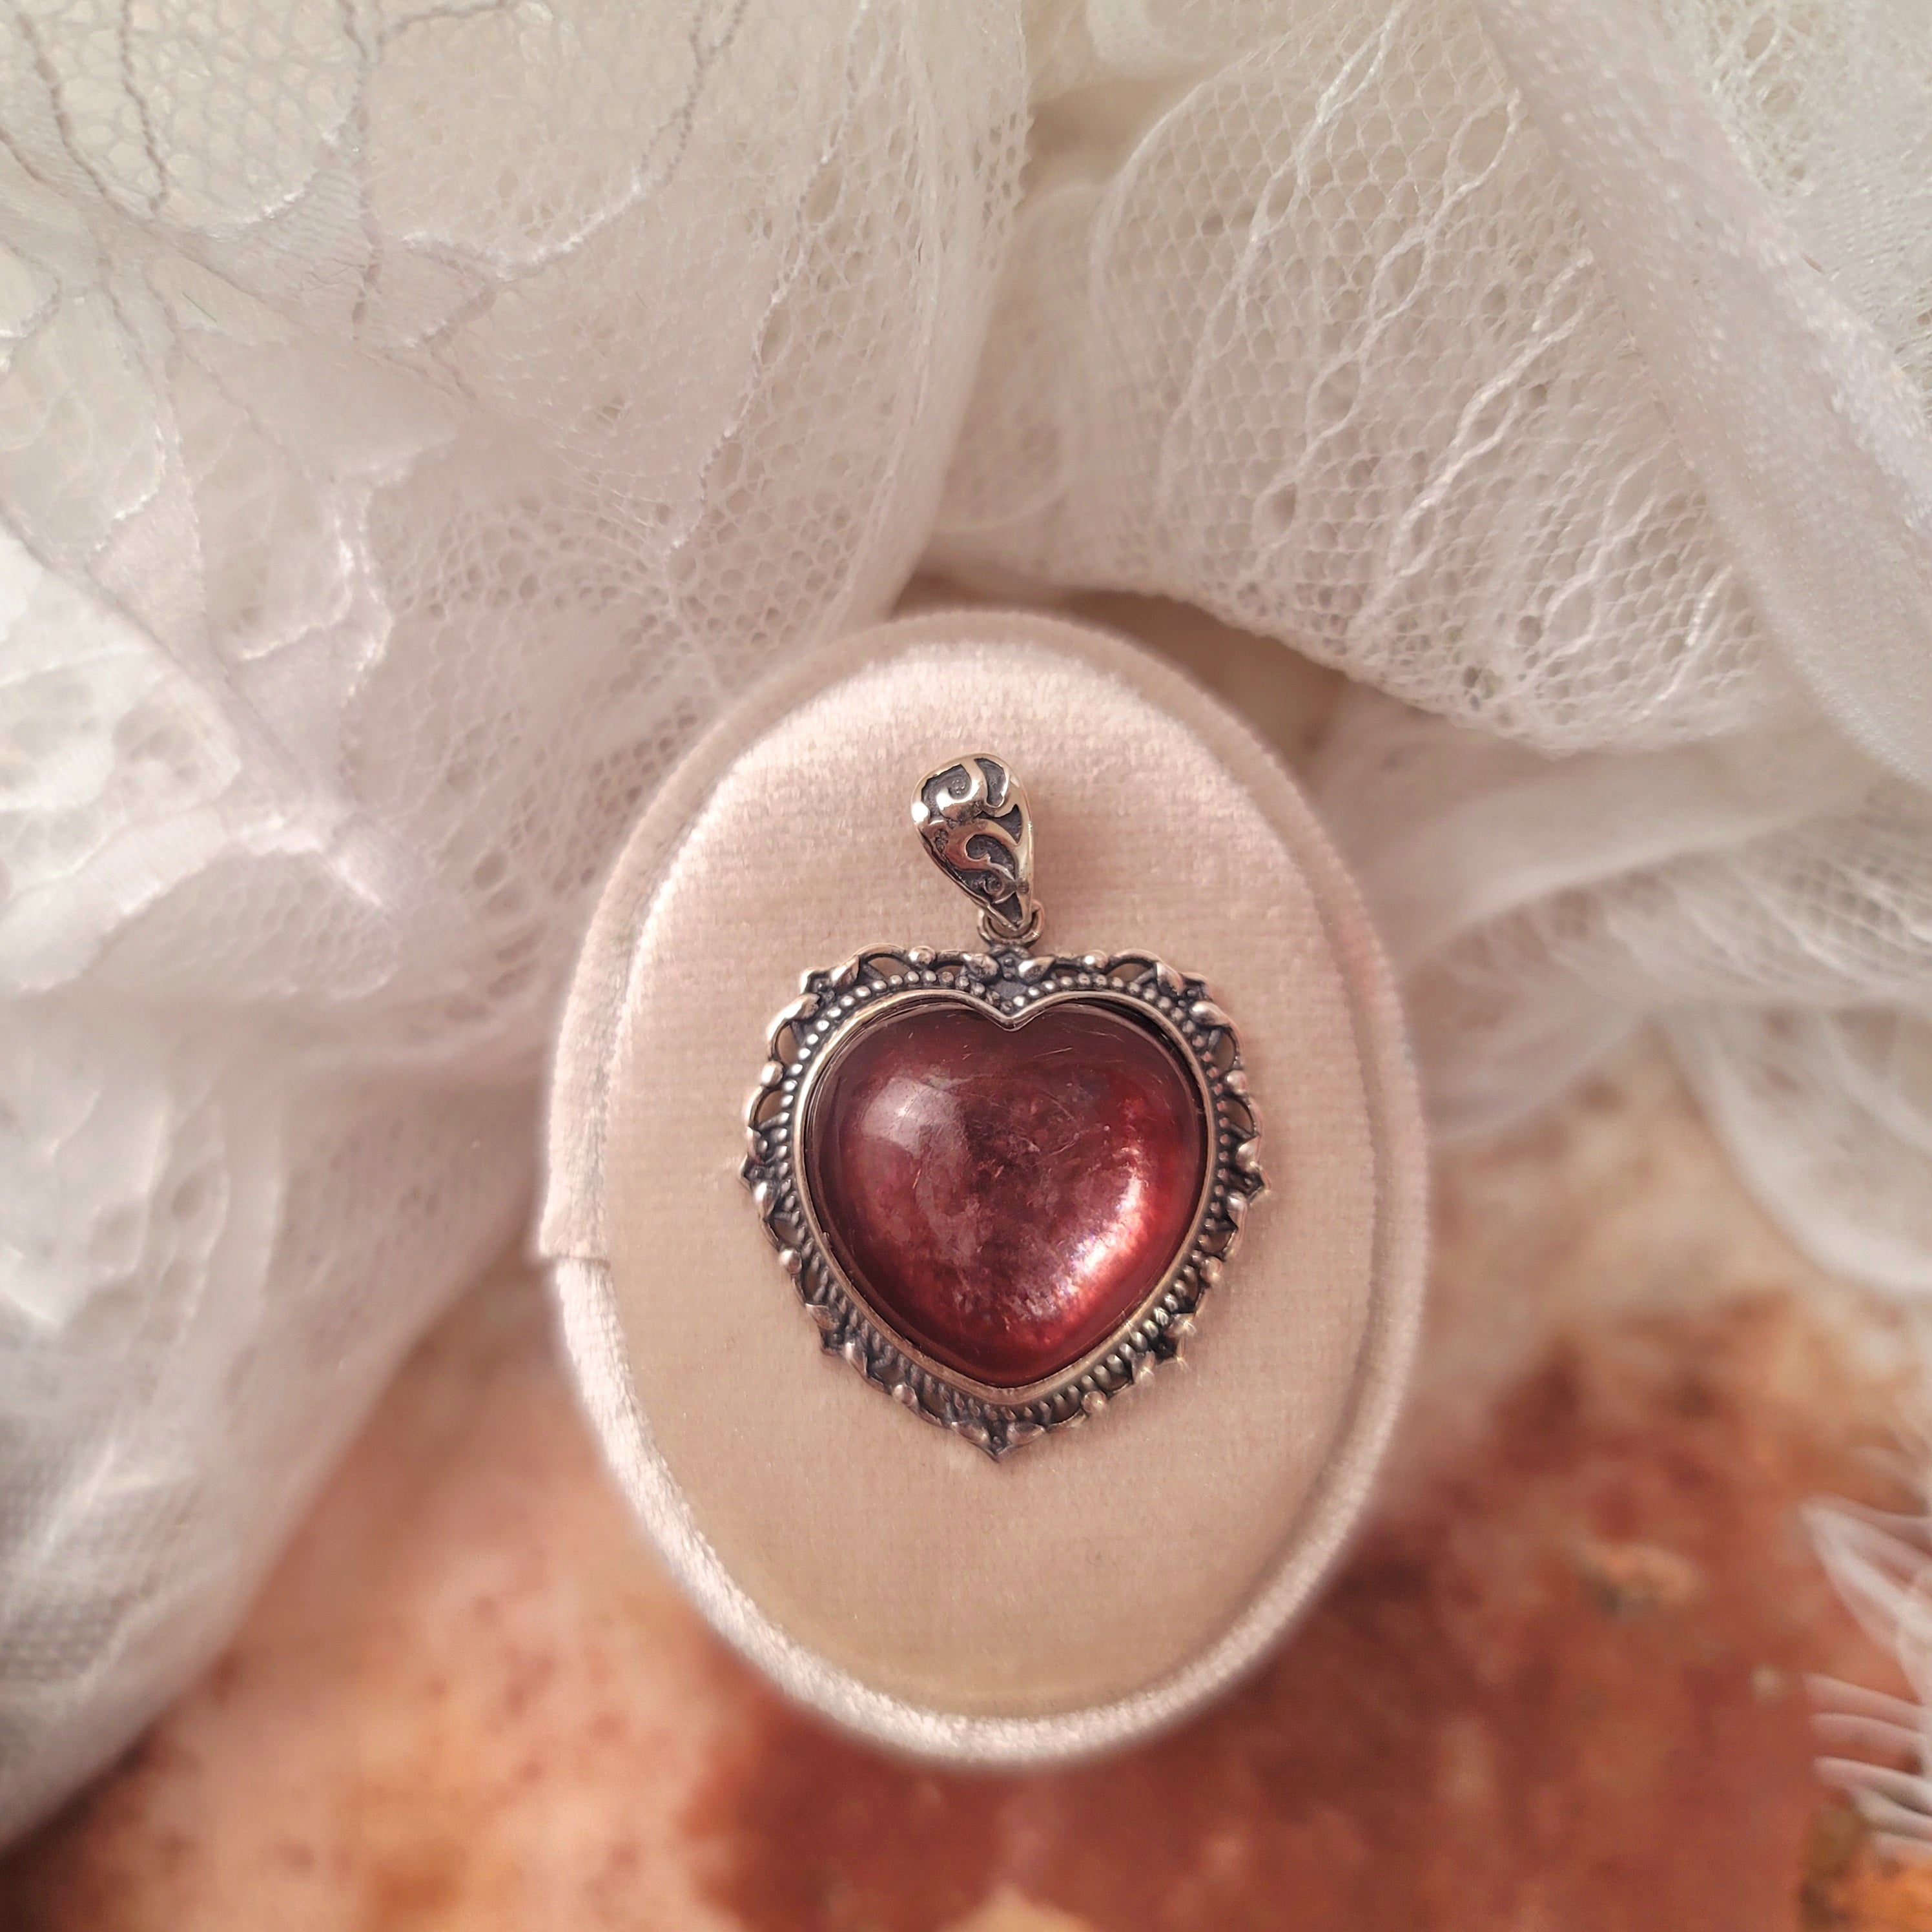 Gem Lepidolite Heart Pendant for Anxiety Support, Joy and Stress Relief